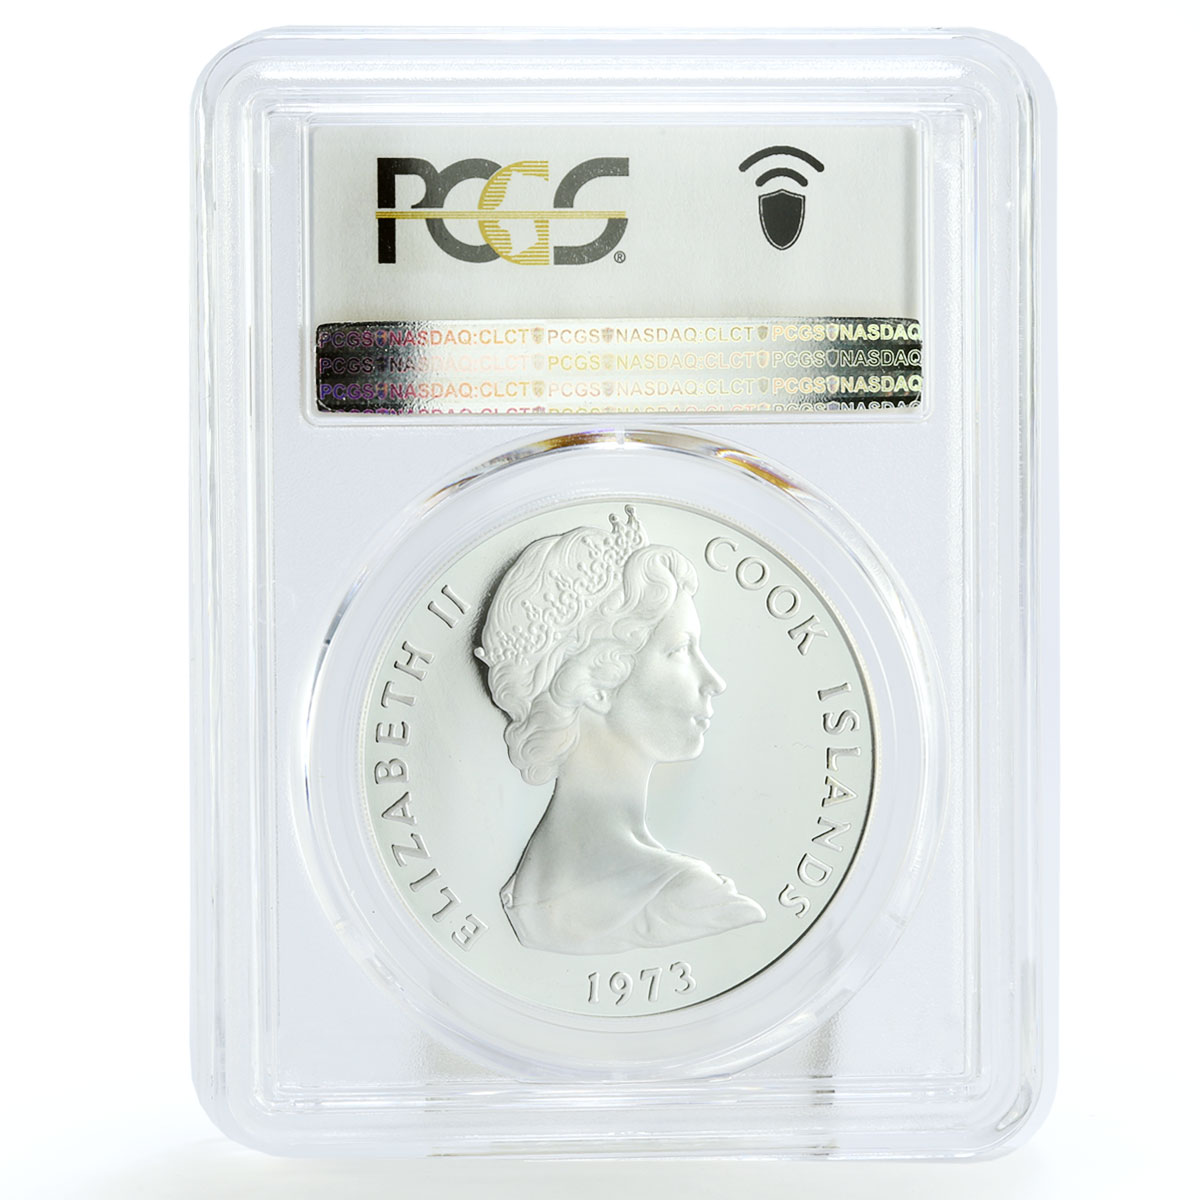 Cook Islands 2 $ 20th Anniversary of the Coronation PR68 PCGS silver coin 1973